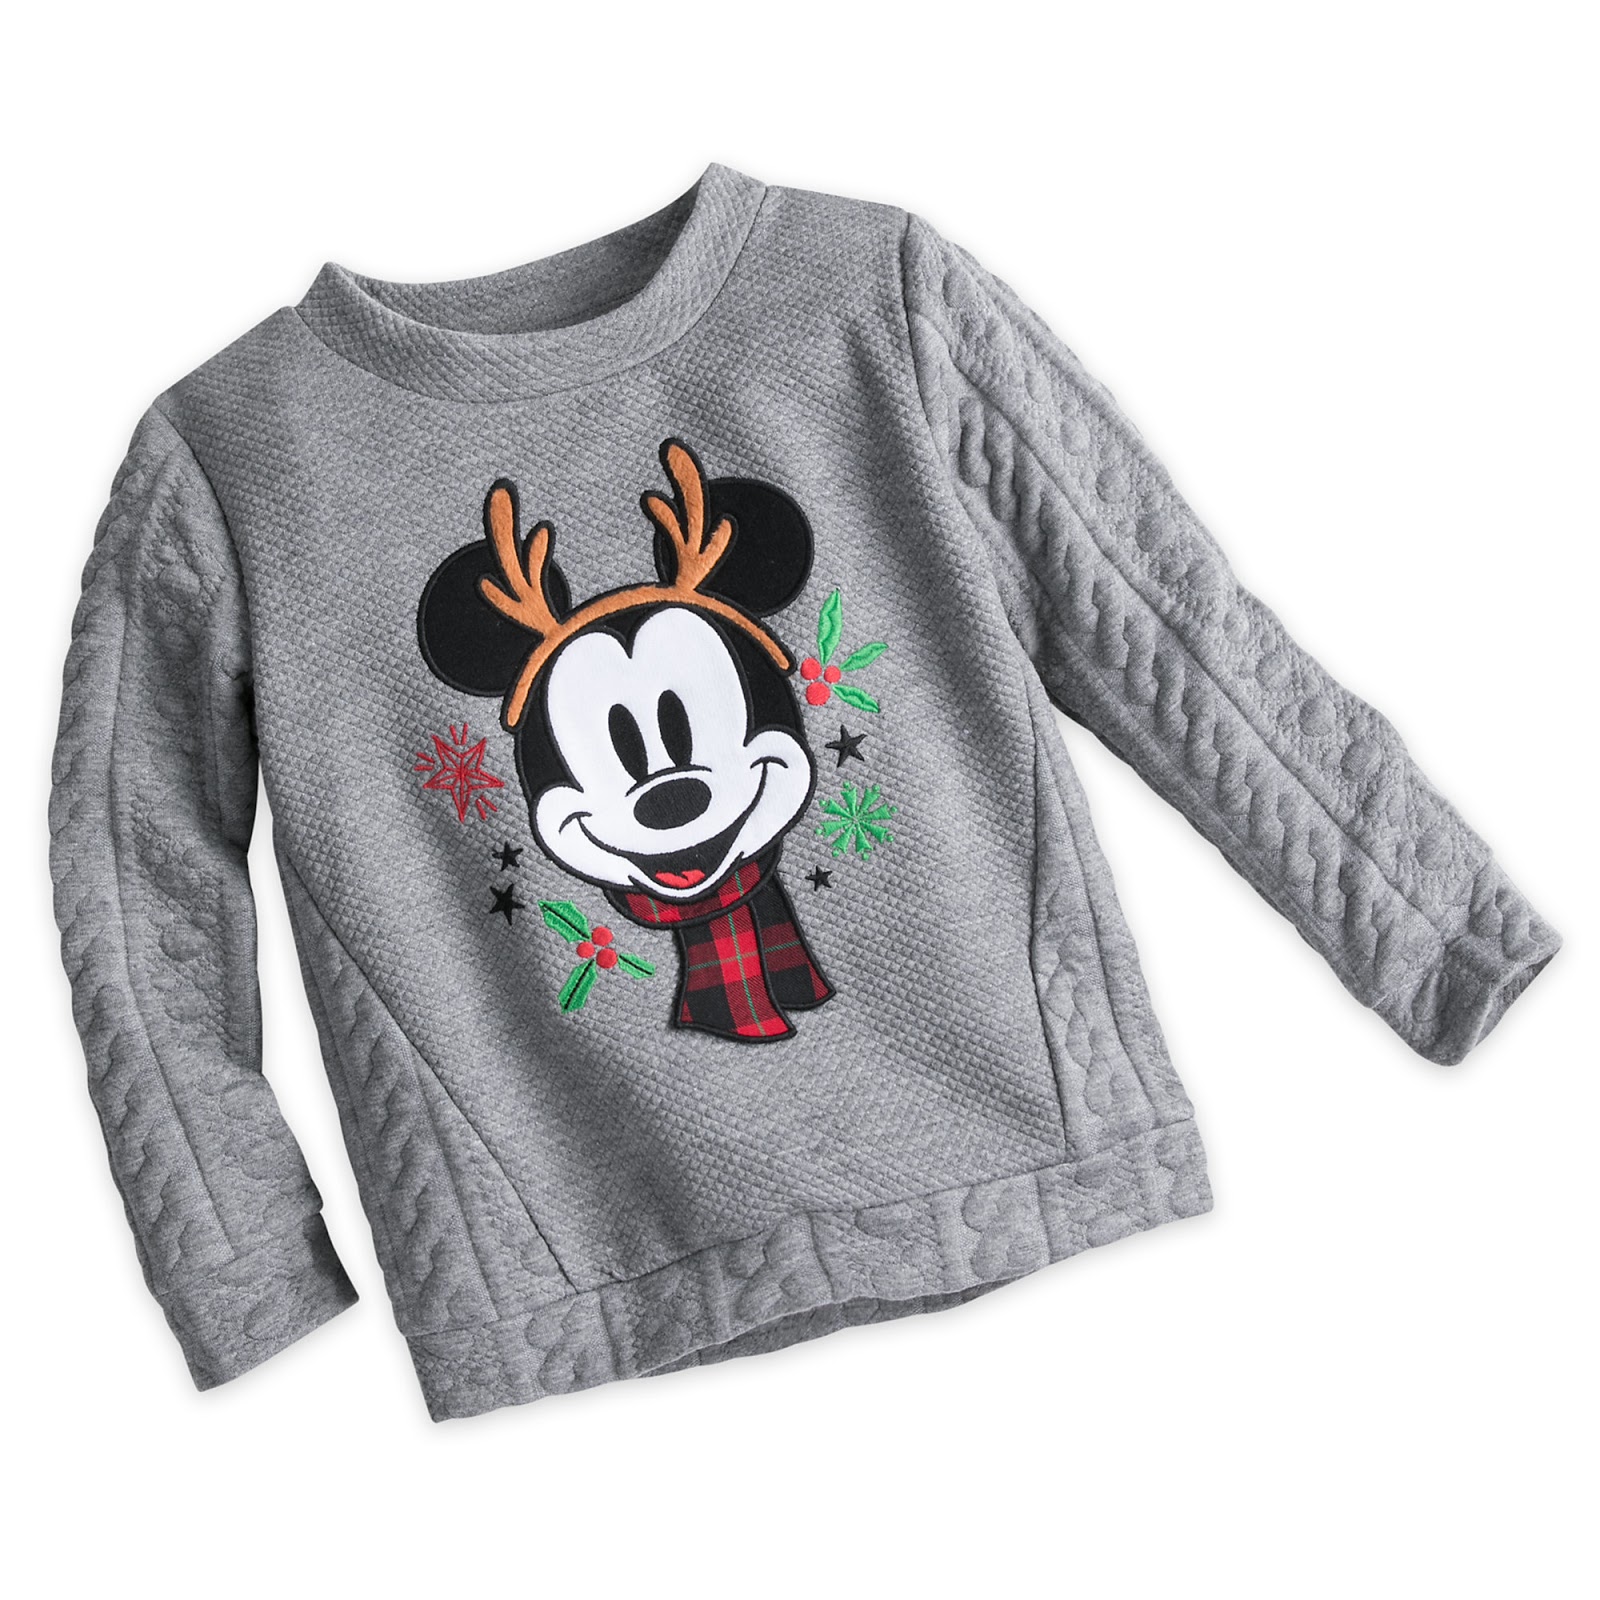 Prince Jacques Disney Mickey Mouse sweater.jpeg